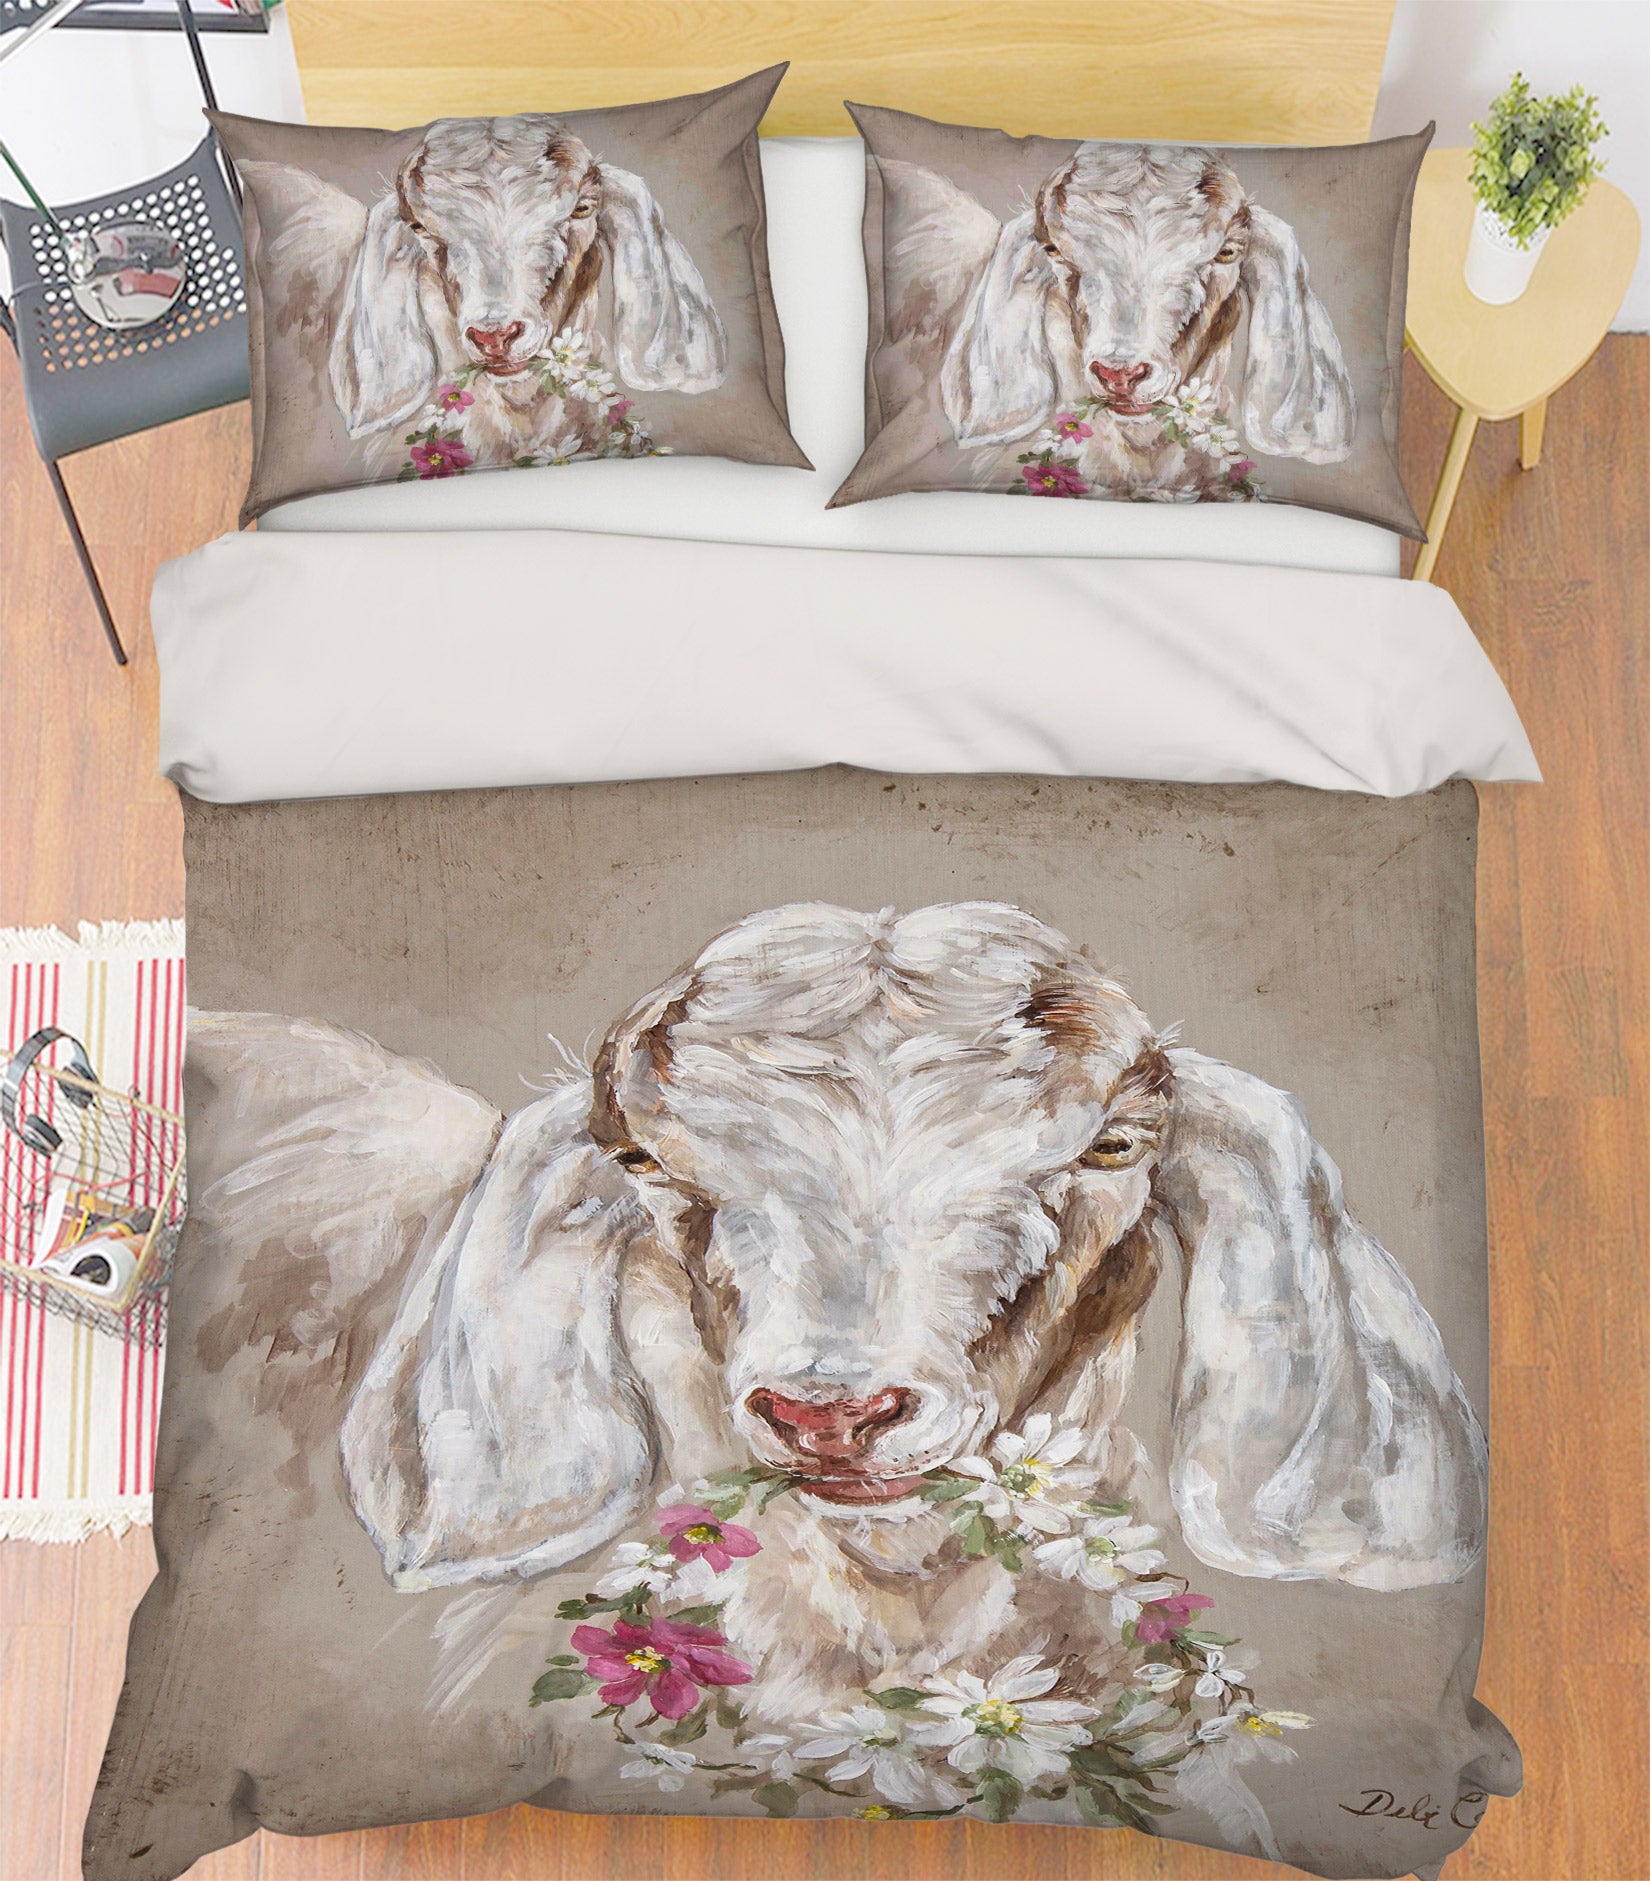 3D Wreath Sheep 2093 Debi Coules Bedding Bed Pillowcases Quilt